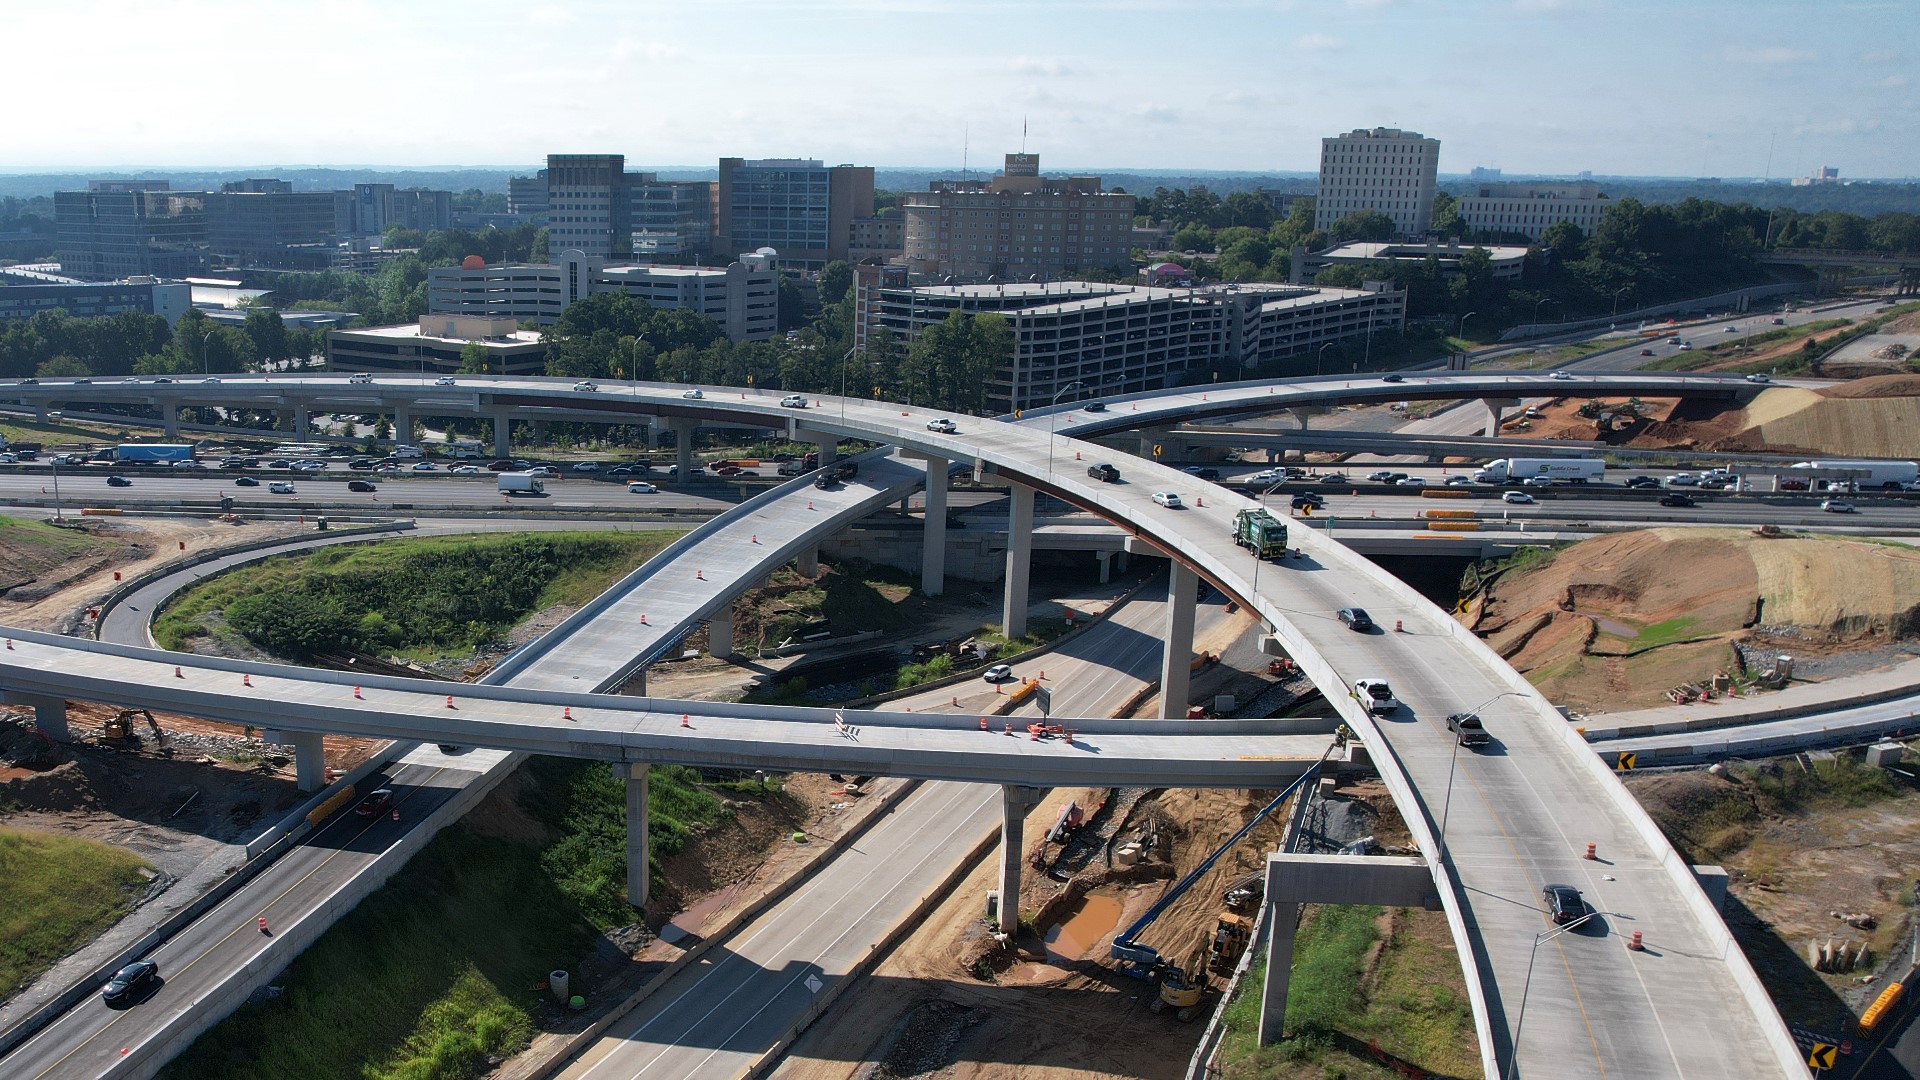 The work involves bridge demolition and reconstruction at Glenridge Drive, Ga. 400 and Peachtree Dunwoody Road.